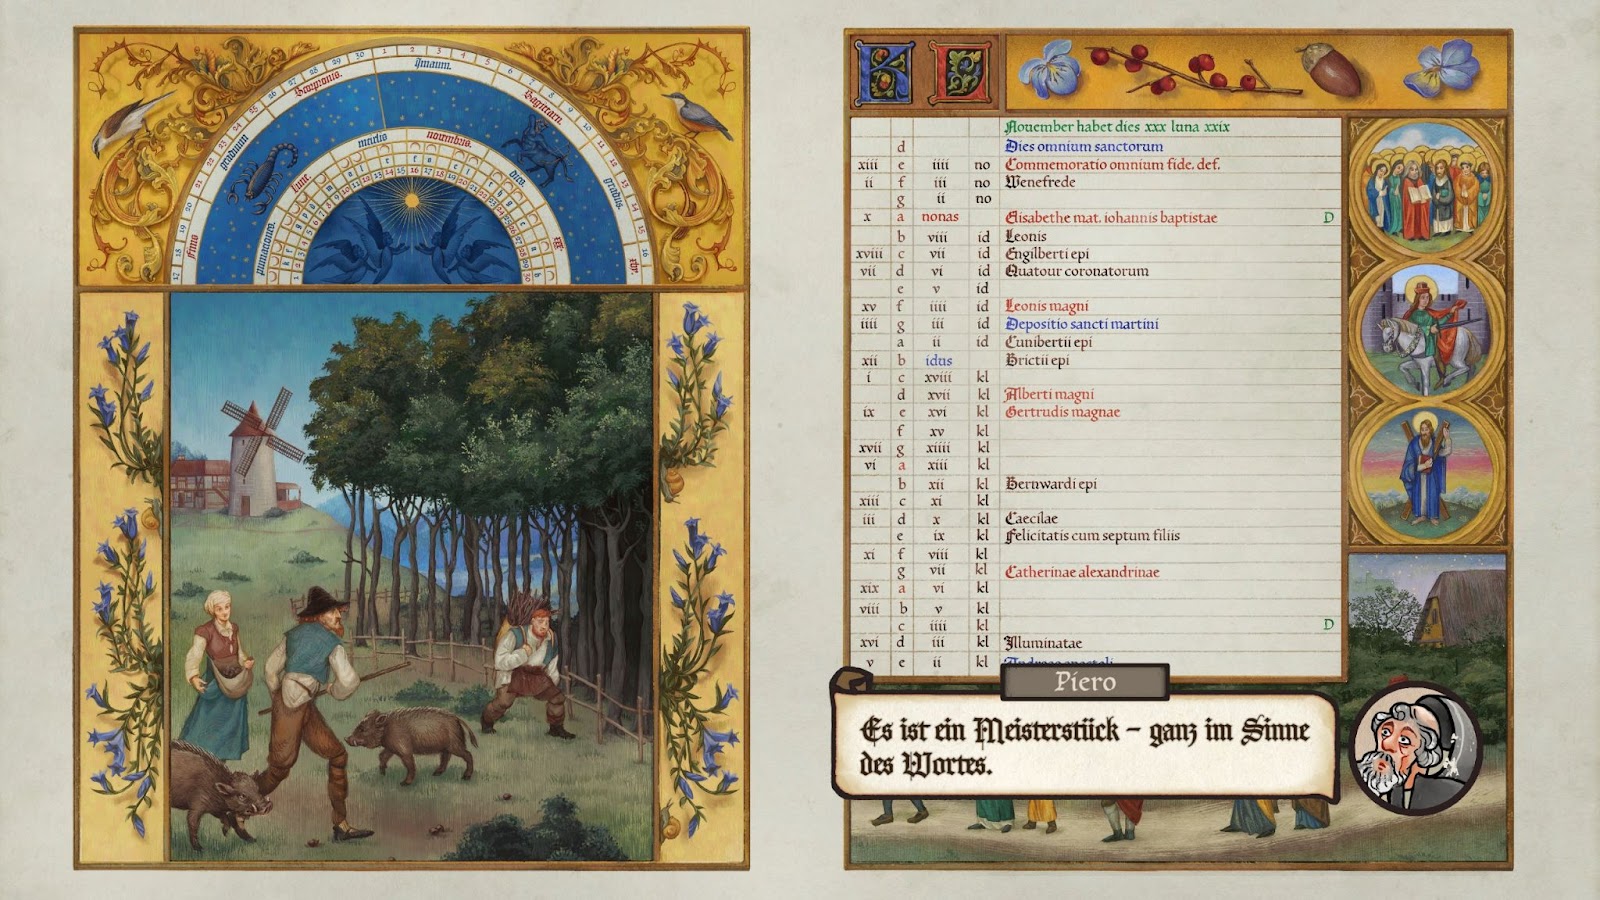 A screenshot of a bifolium of an illuminated manuscript inspired by the Tres Riches Heures de Duc du Berry, the project Andreas is working on throughout the first part of the game.